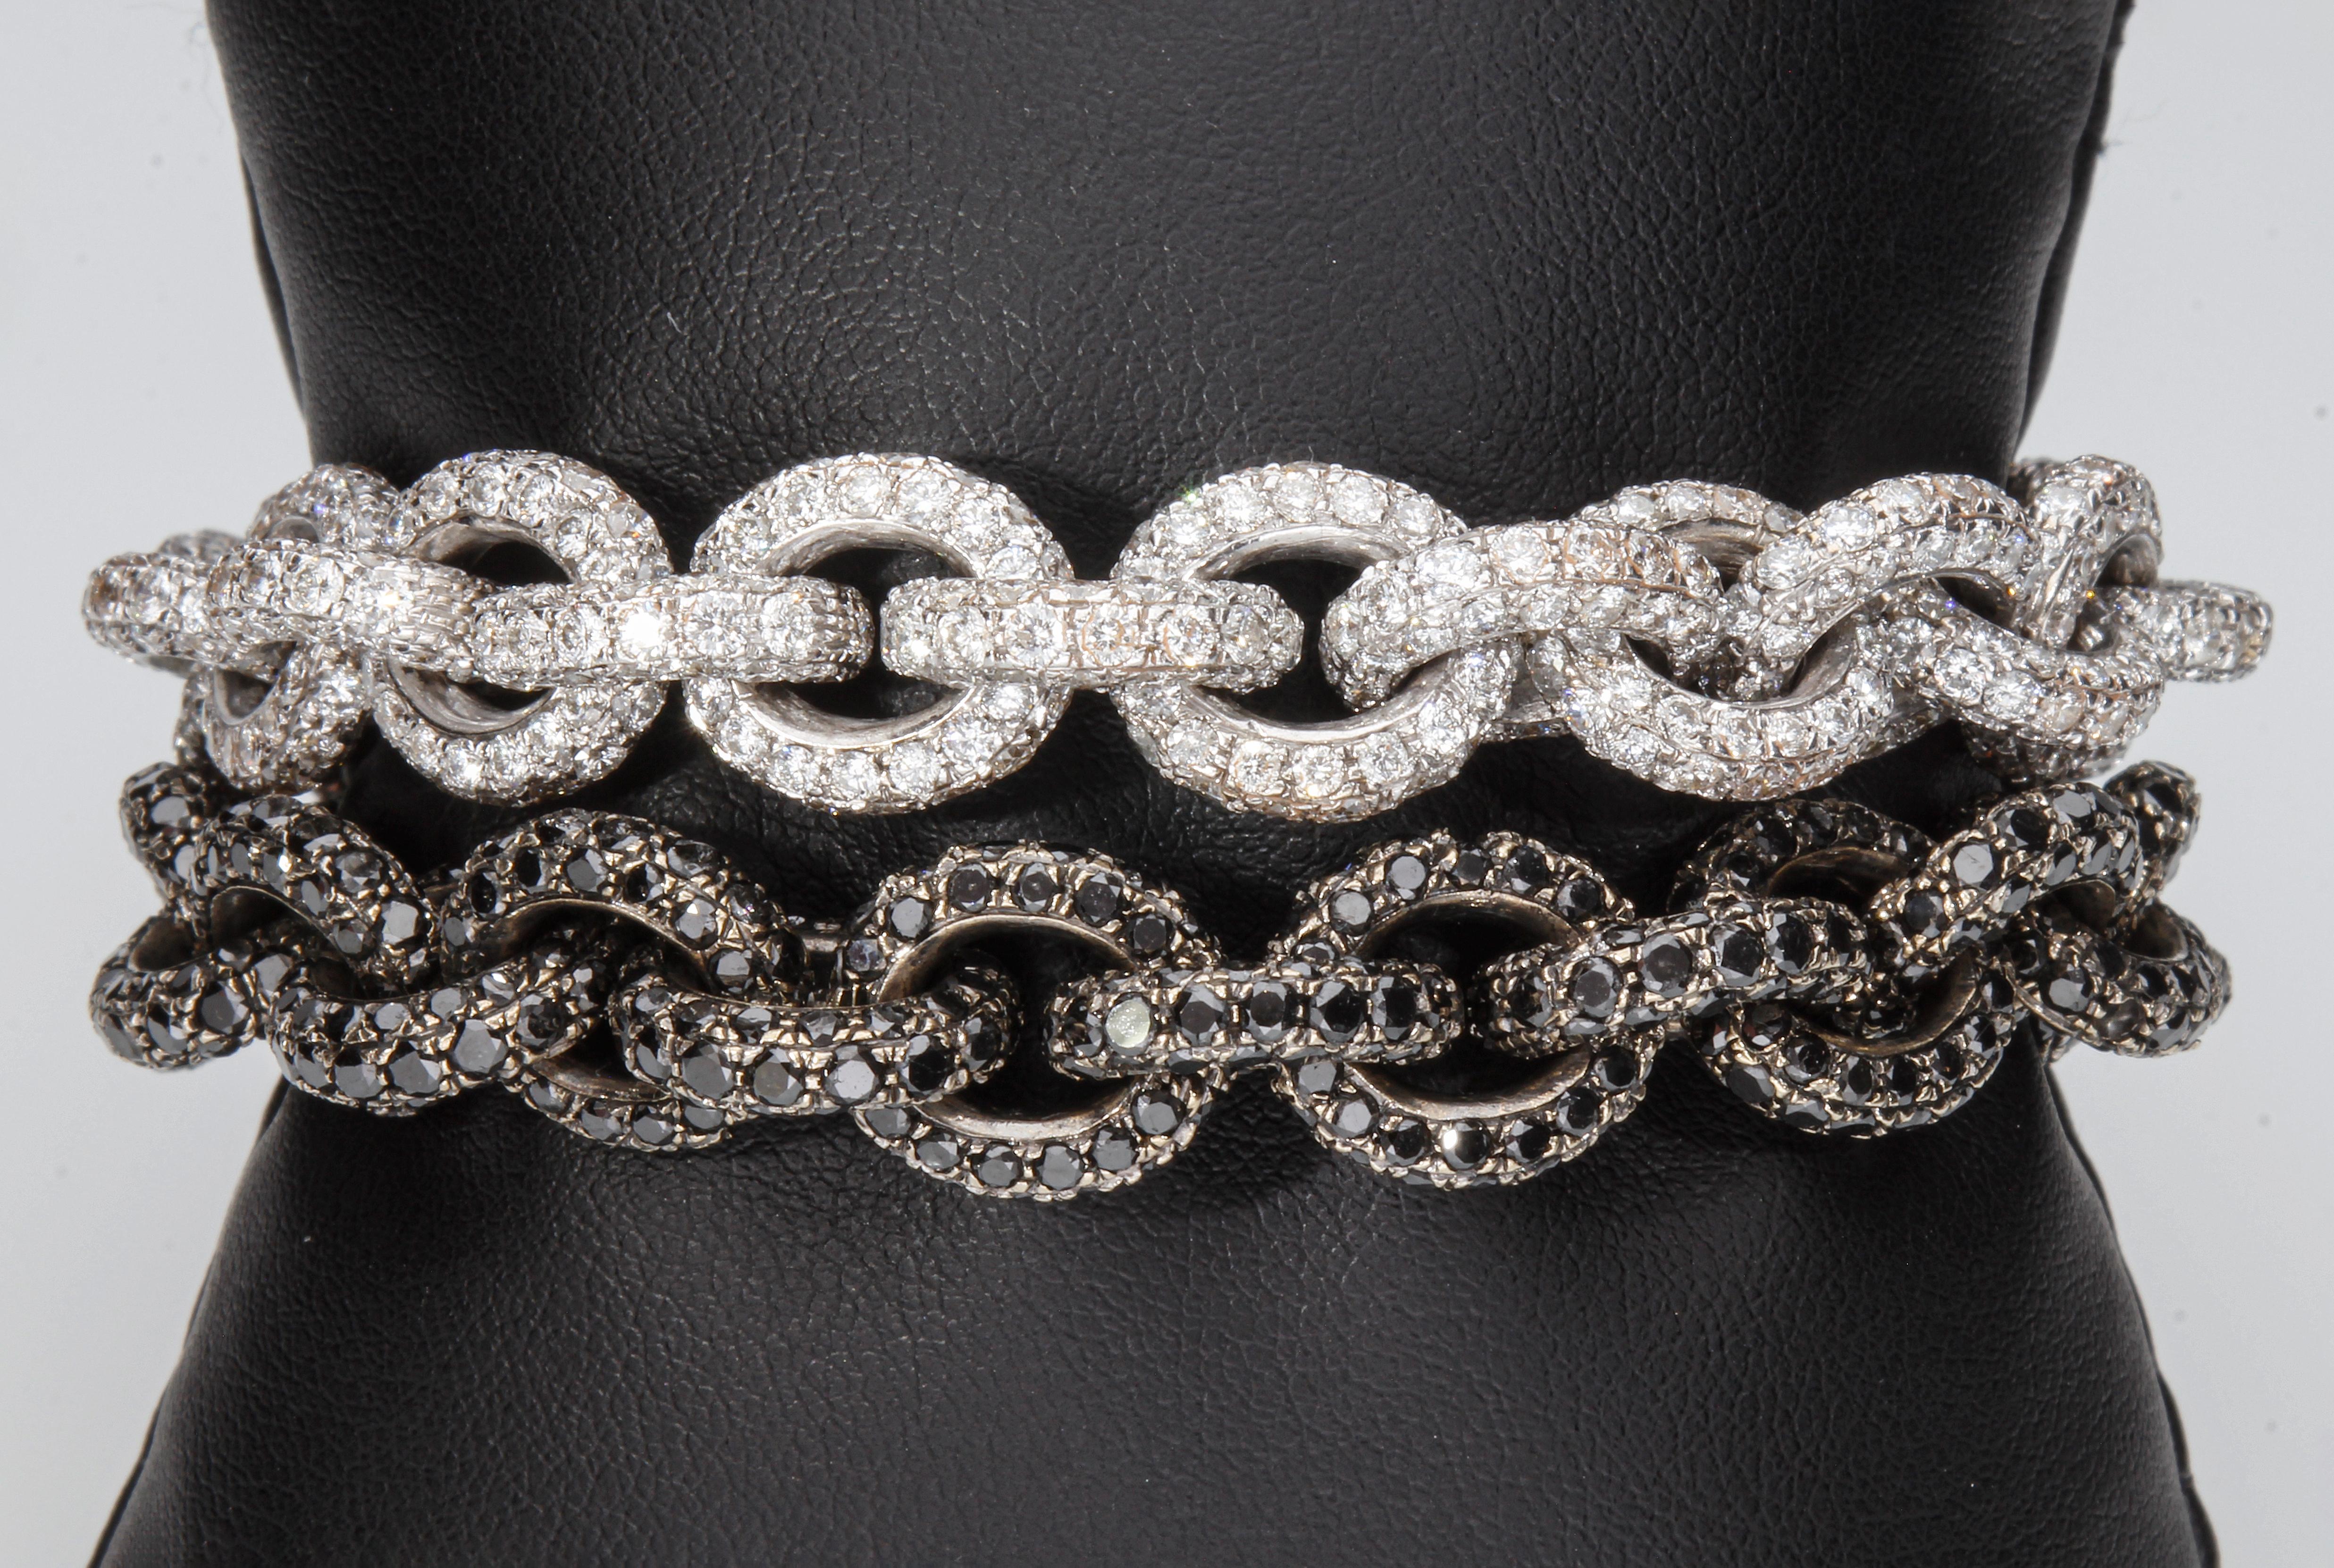 Chain Necklace/Bracelet with 64.26 Ct of White and Black Diamonds. Handmade. For Sale 1